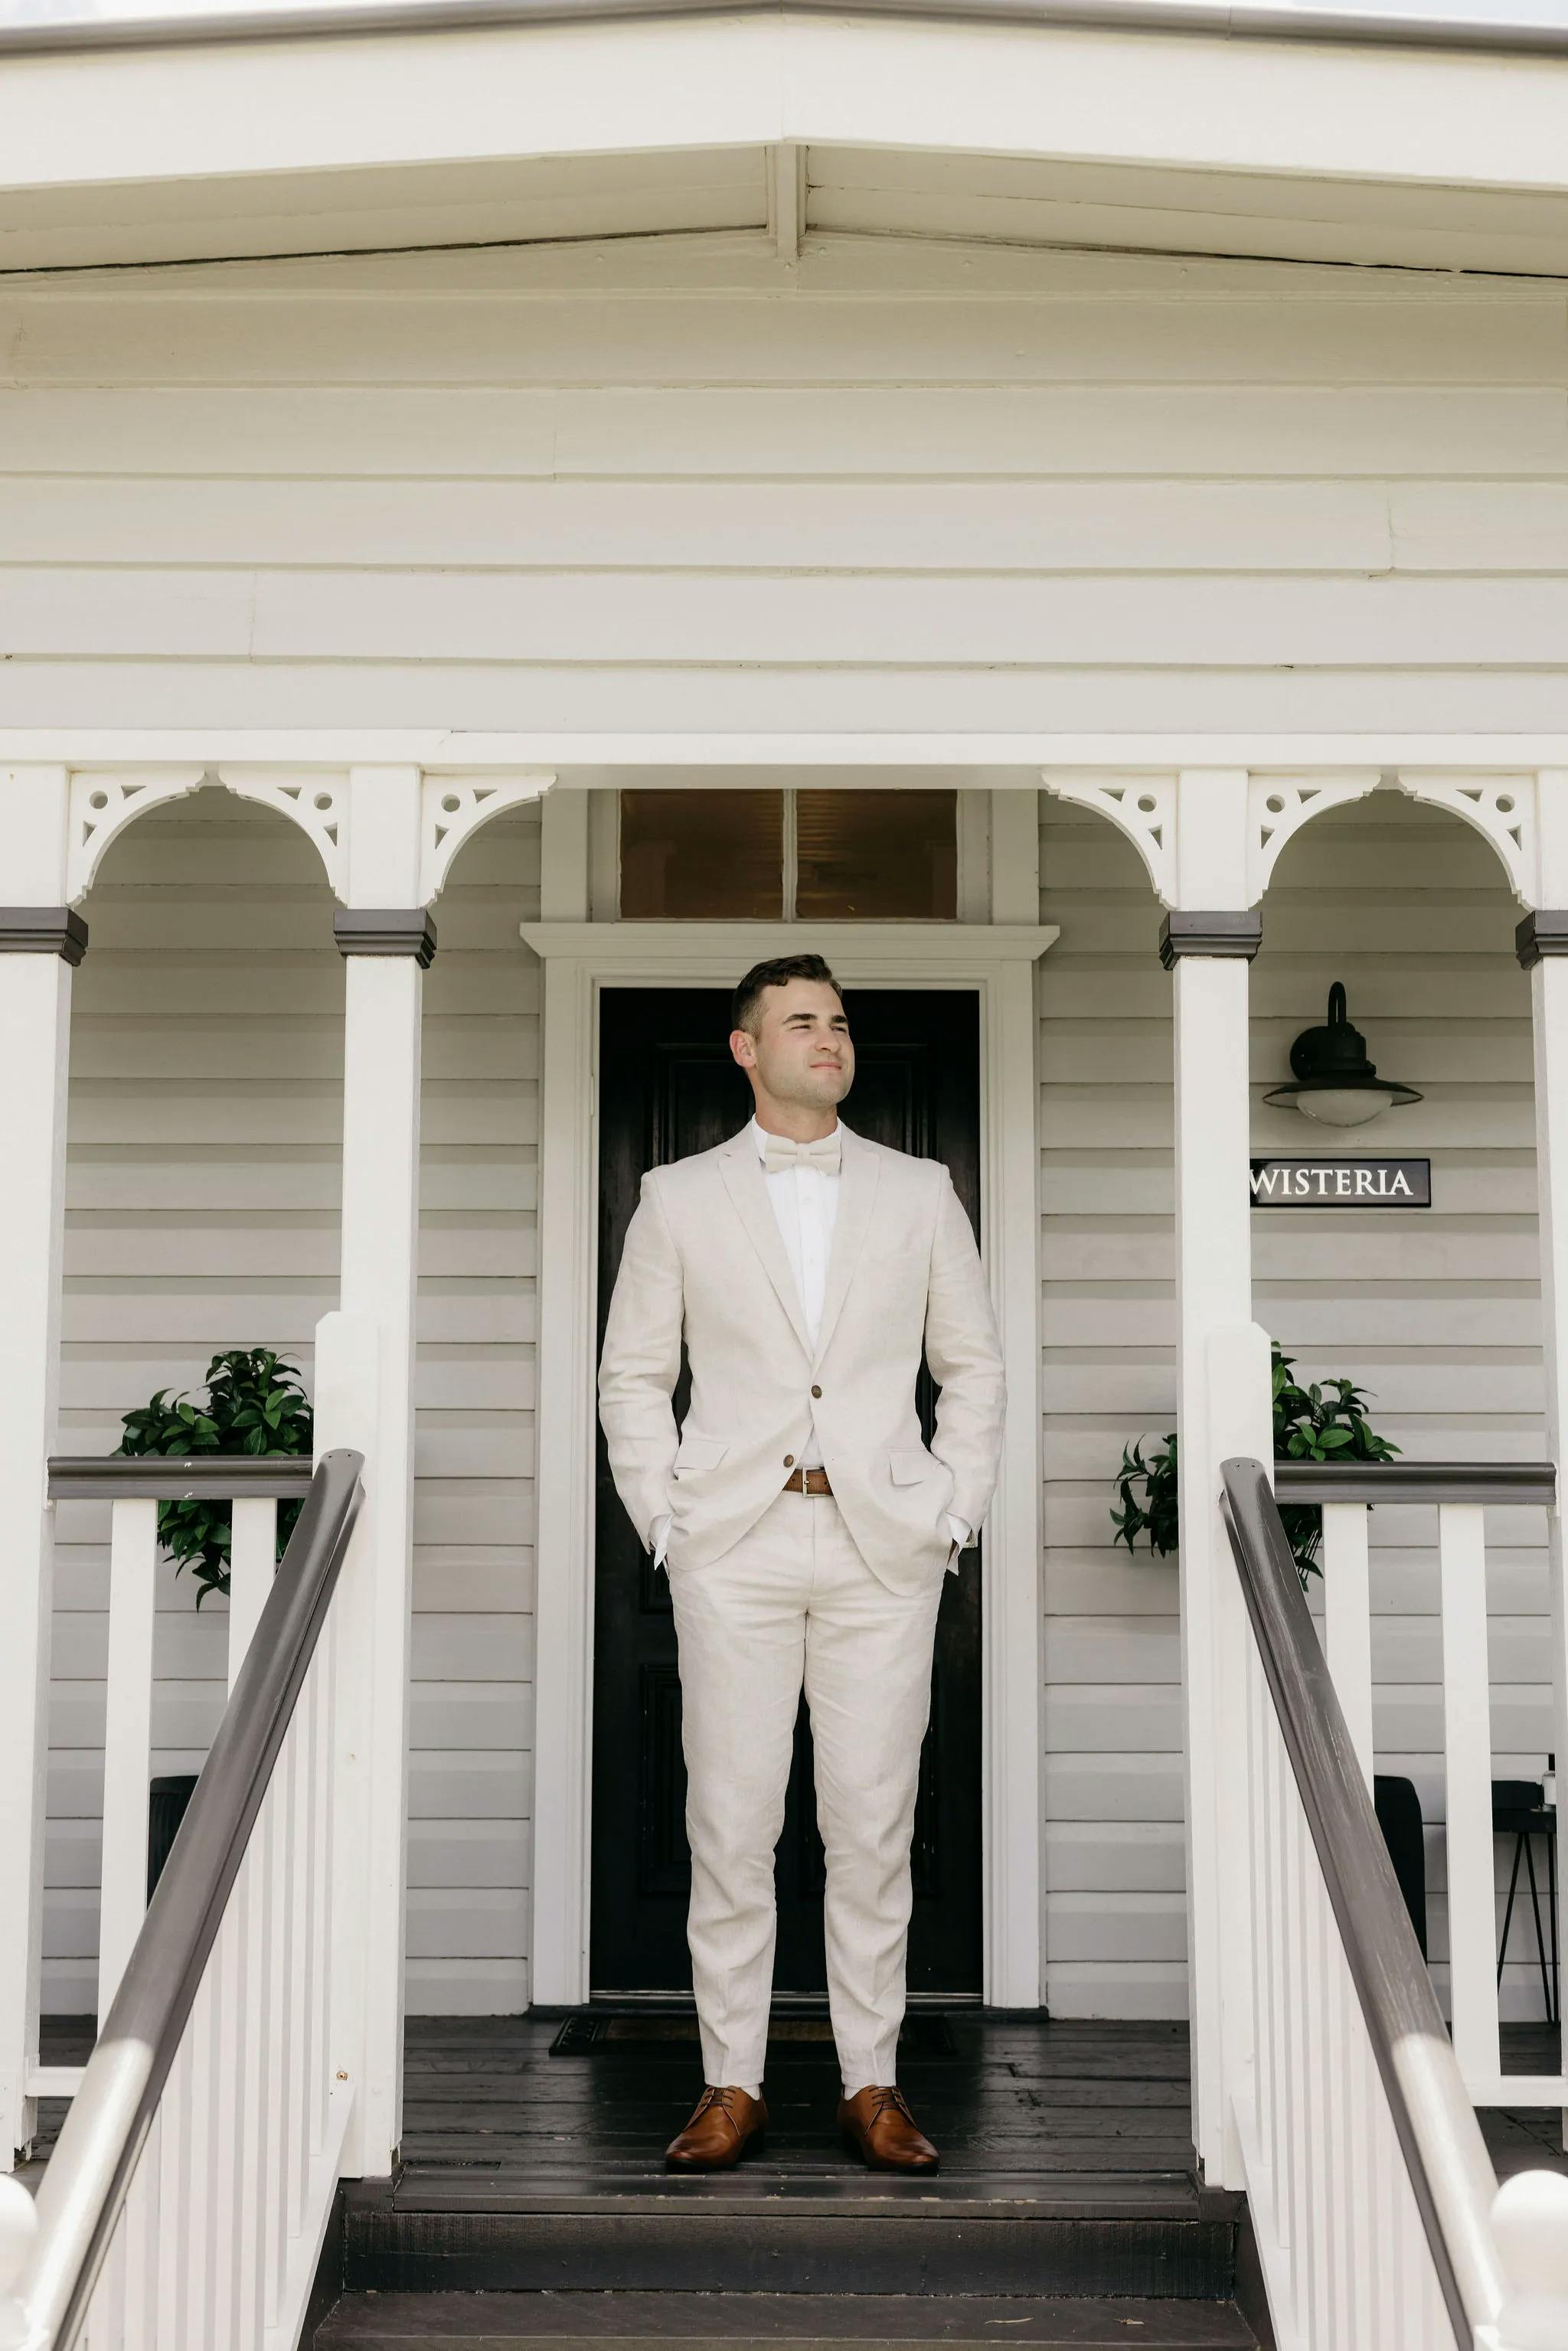 Man standing on steps at front of house